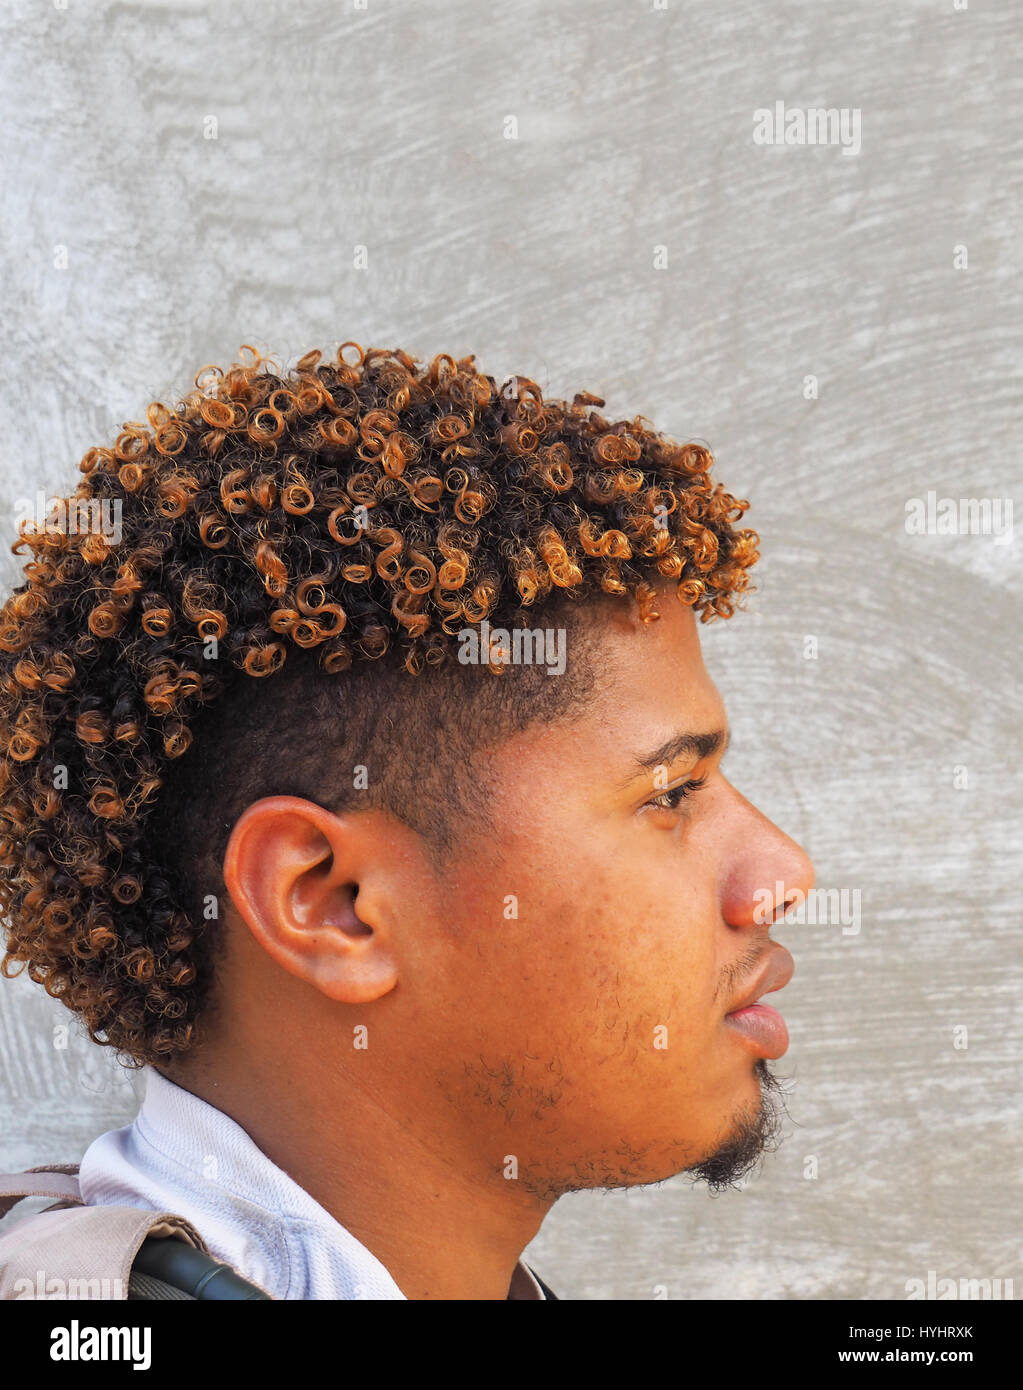 Profile of young Dominican man with colorful hairstyle at Puerto Plata. Stock Photo